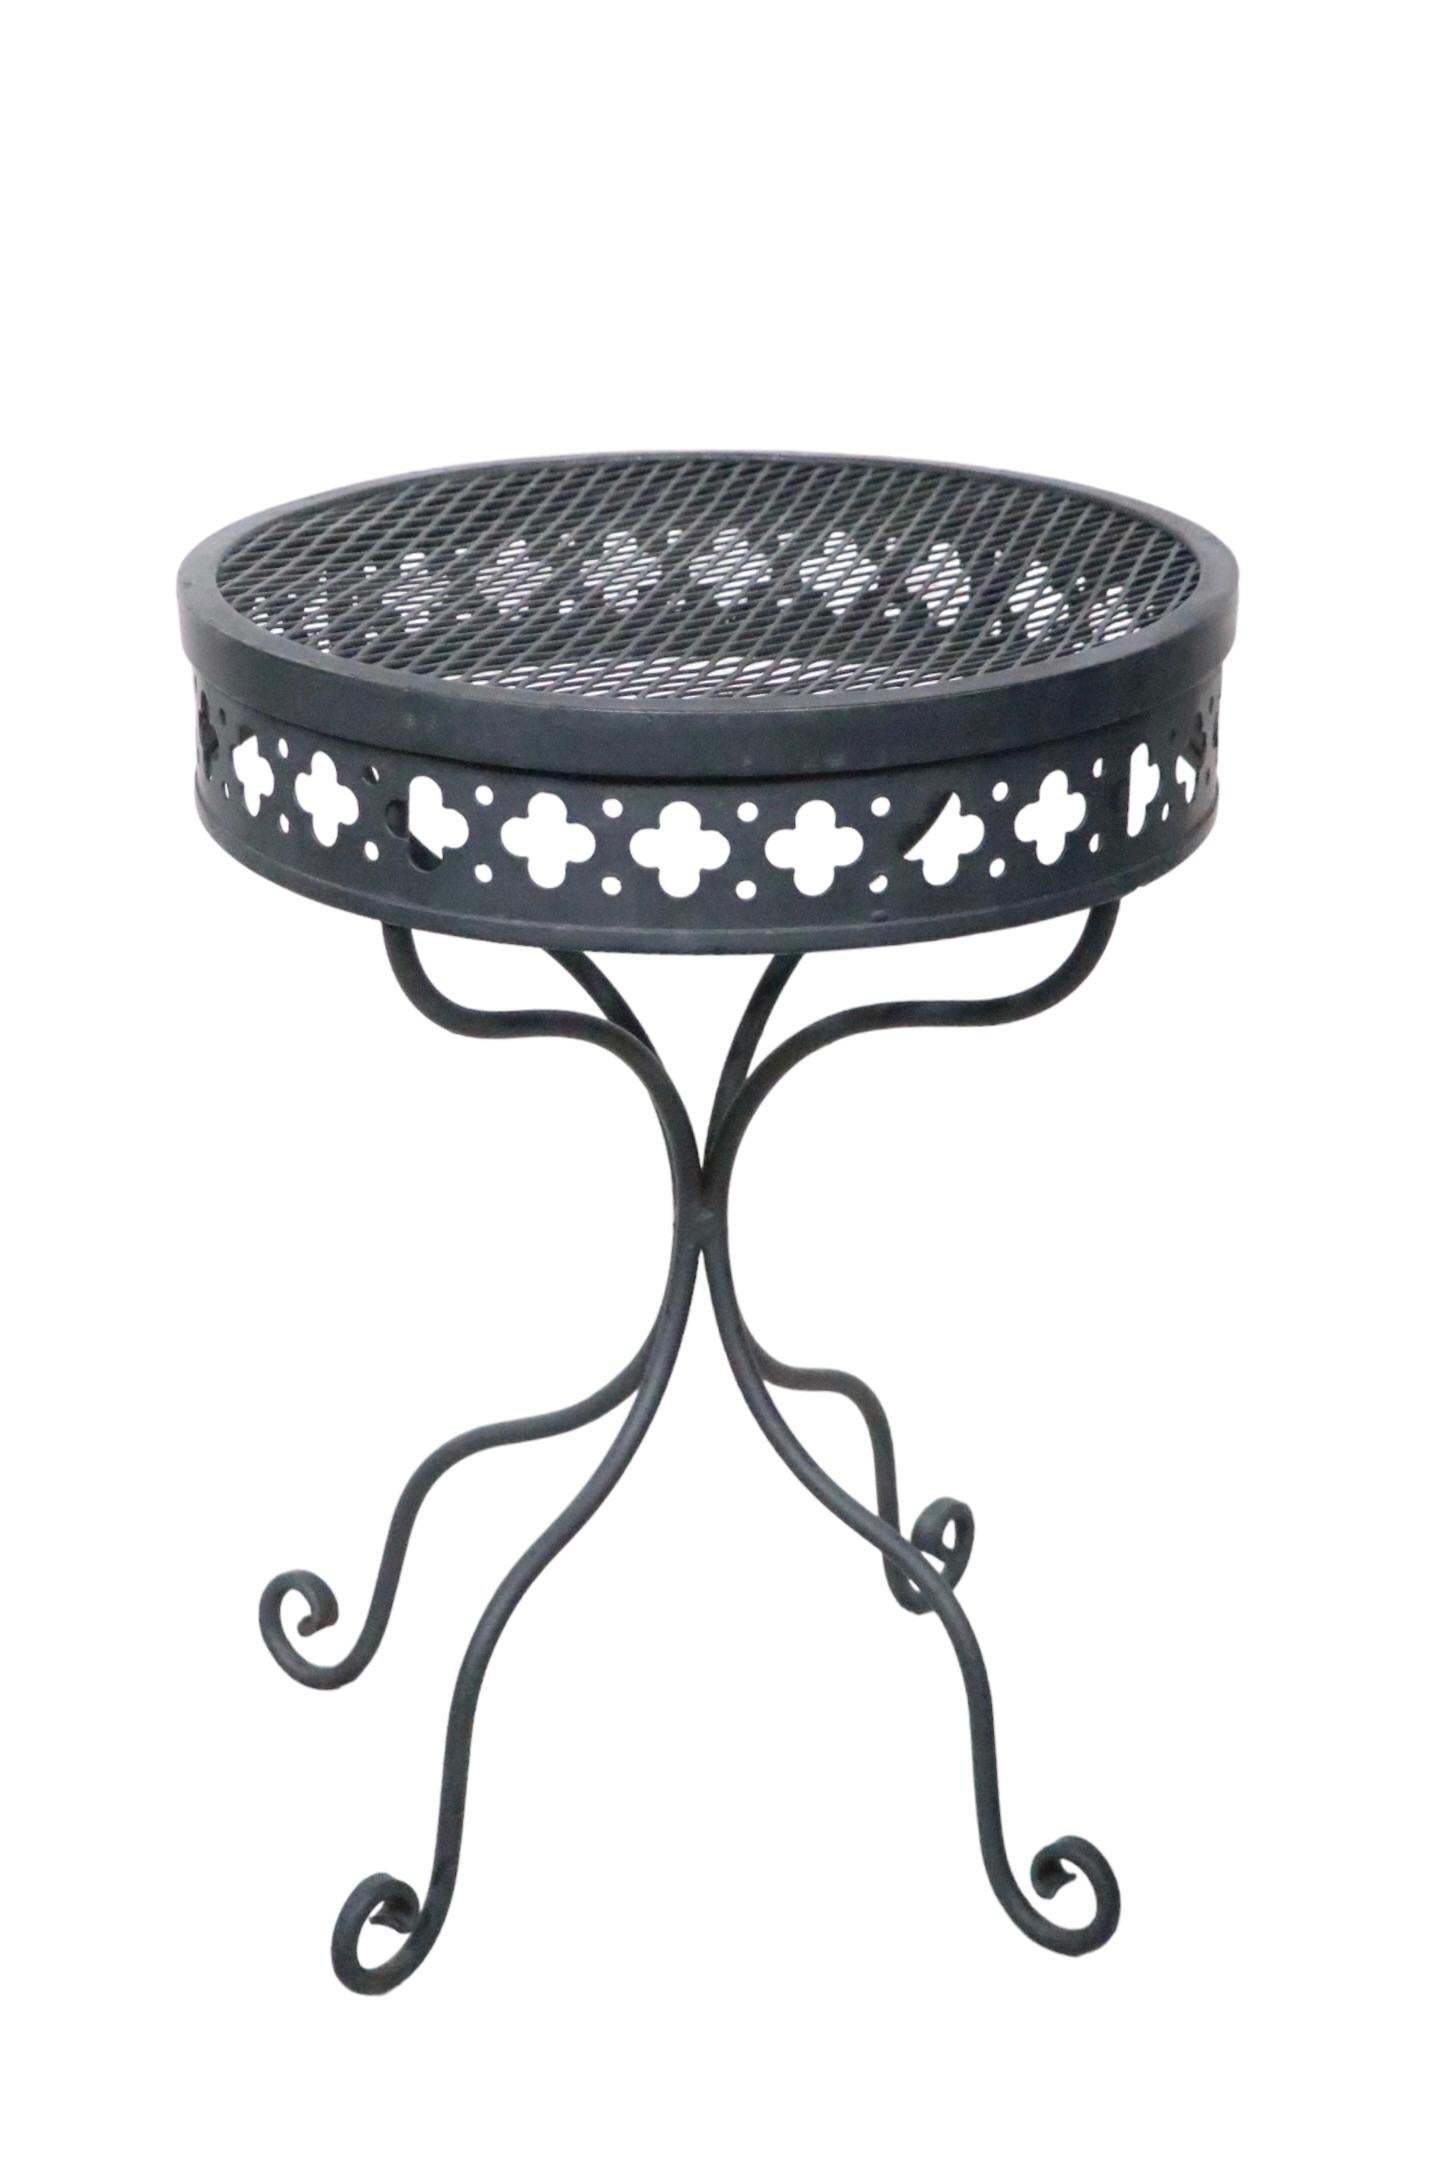 Wrought Iron and Metal Mesh Garden Patio Side End Table Taj Mahal by Salterini For Sale 3